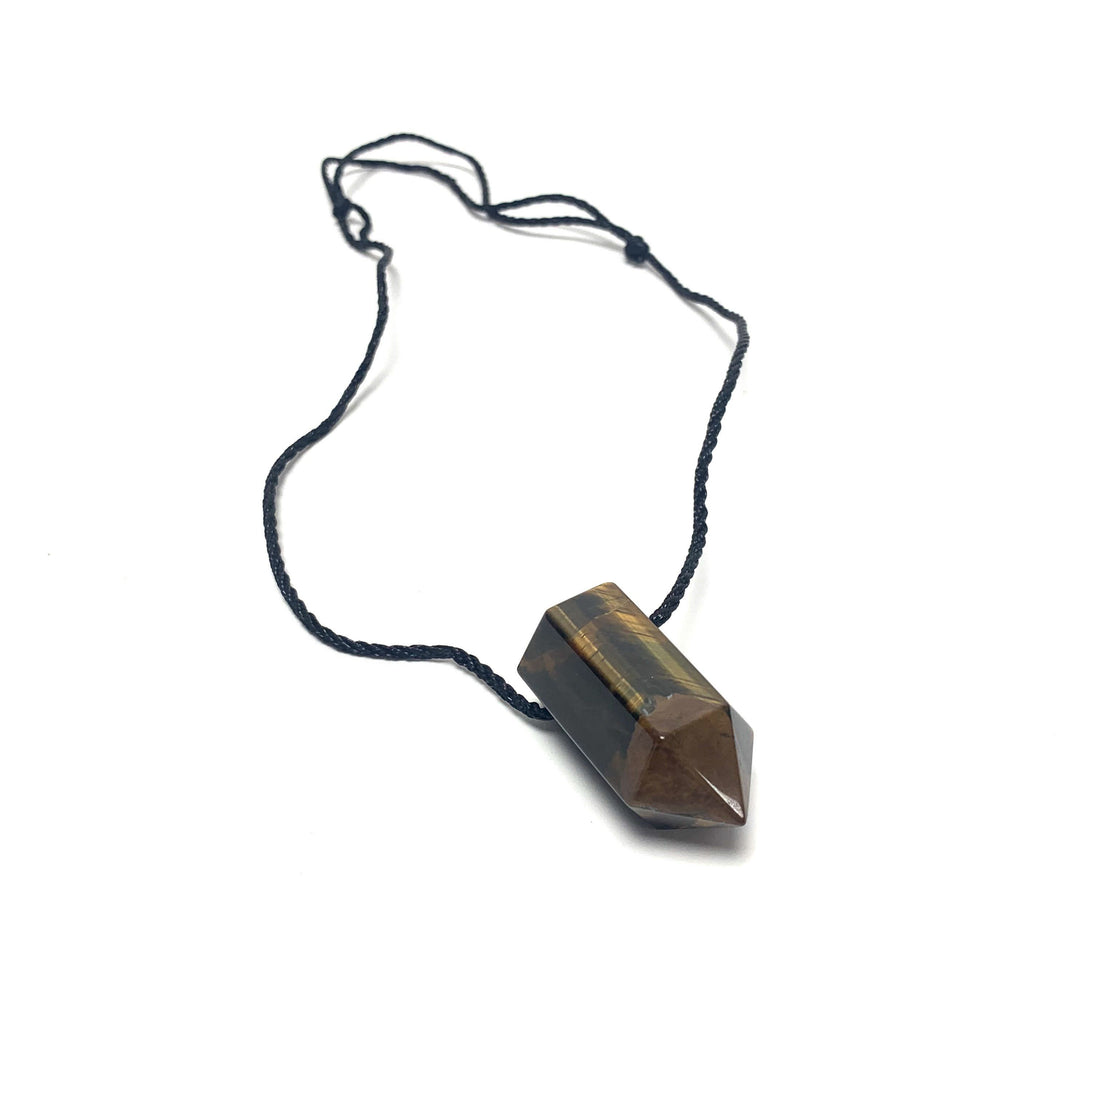 Tiger's Eye Nylon Cord Necklace Necklaces Crystals B. $18.00 (Polished Point) 